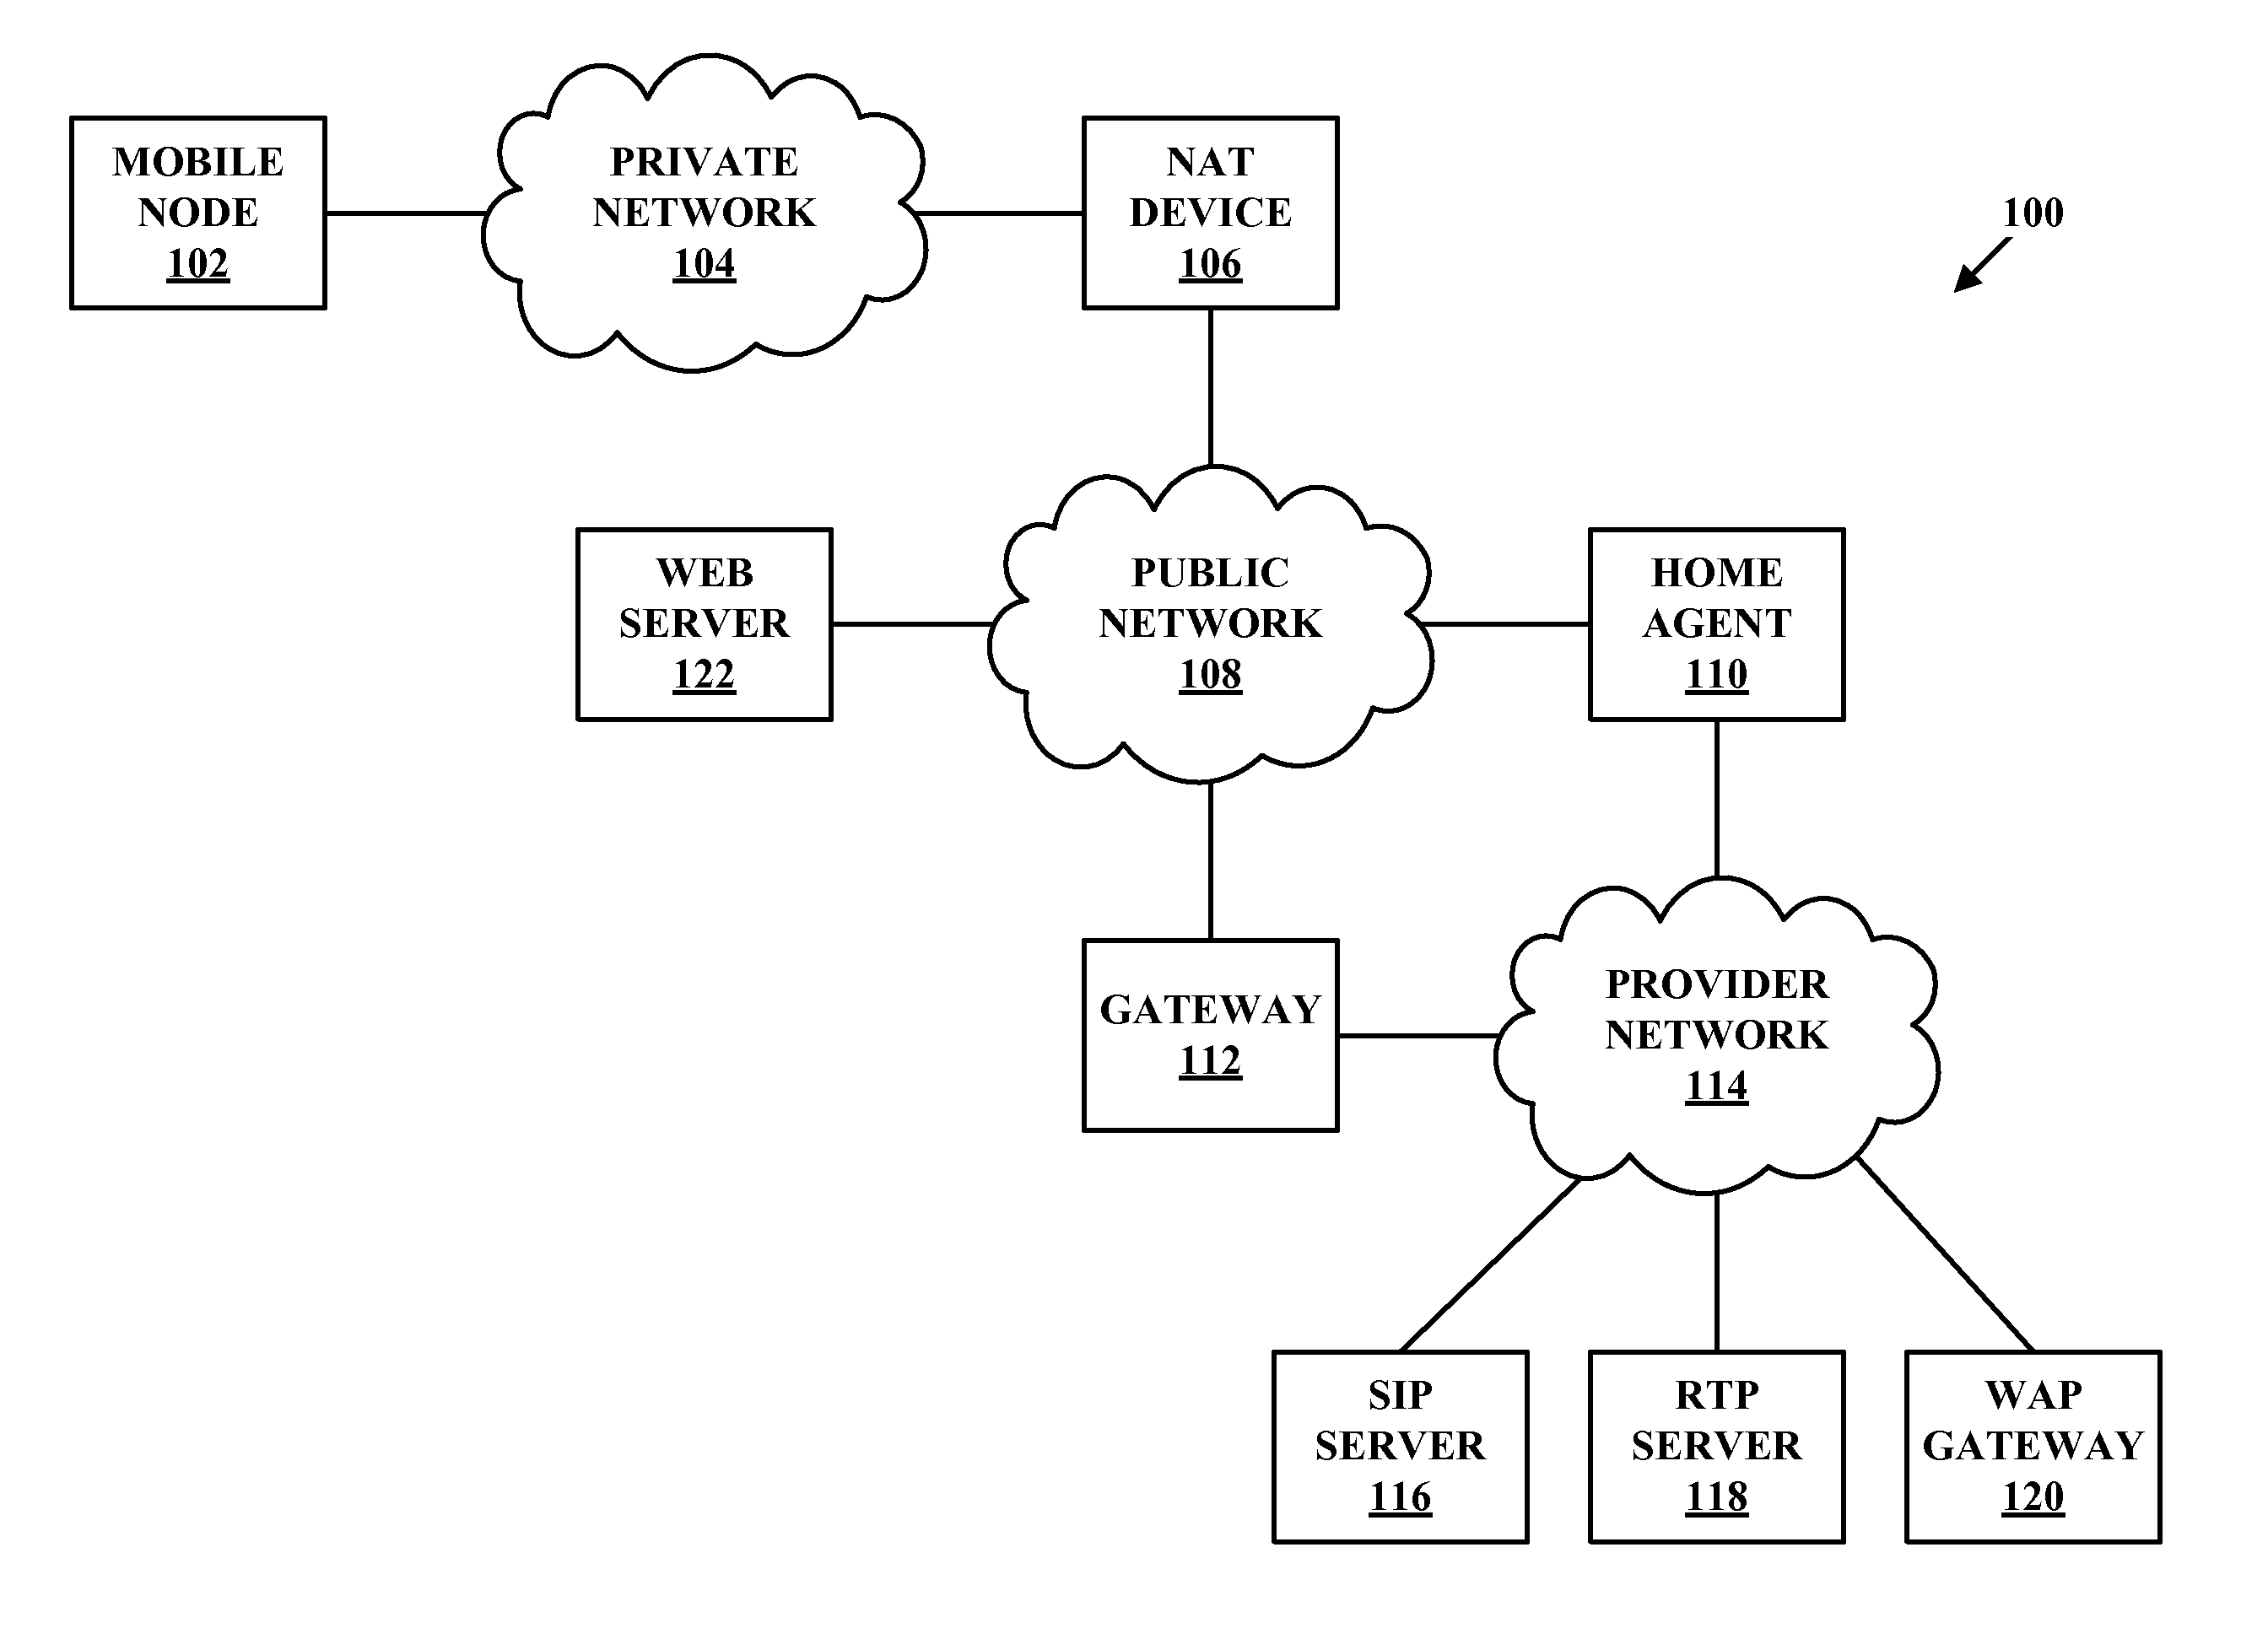 Methods and systems for secure mobile-IP traffic traversing network address translation